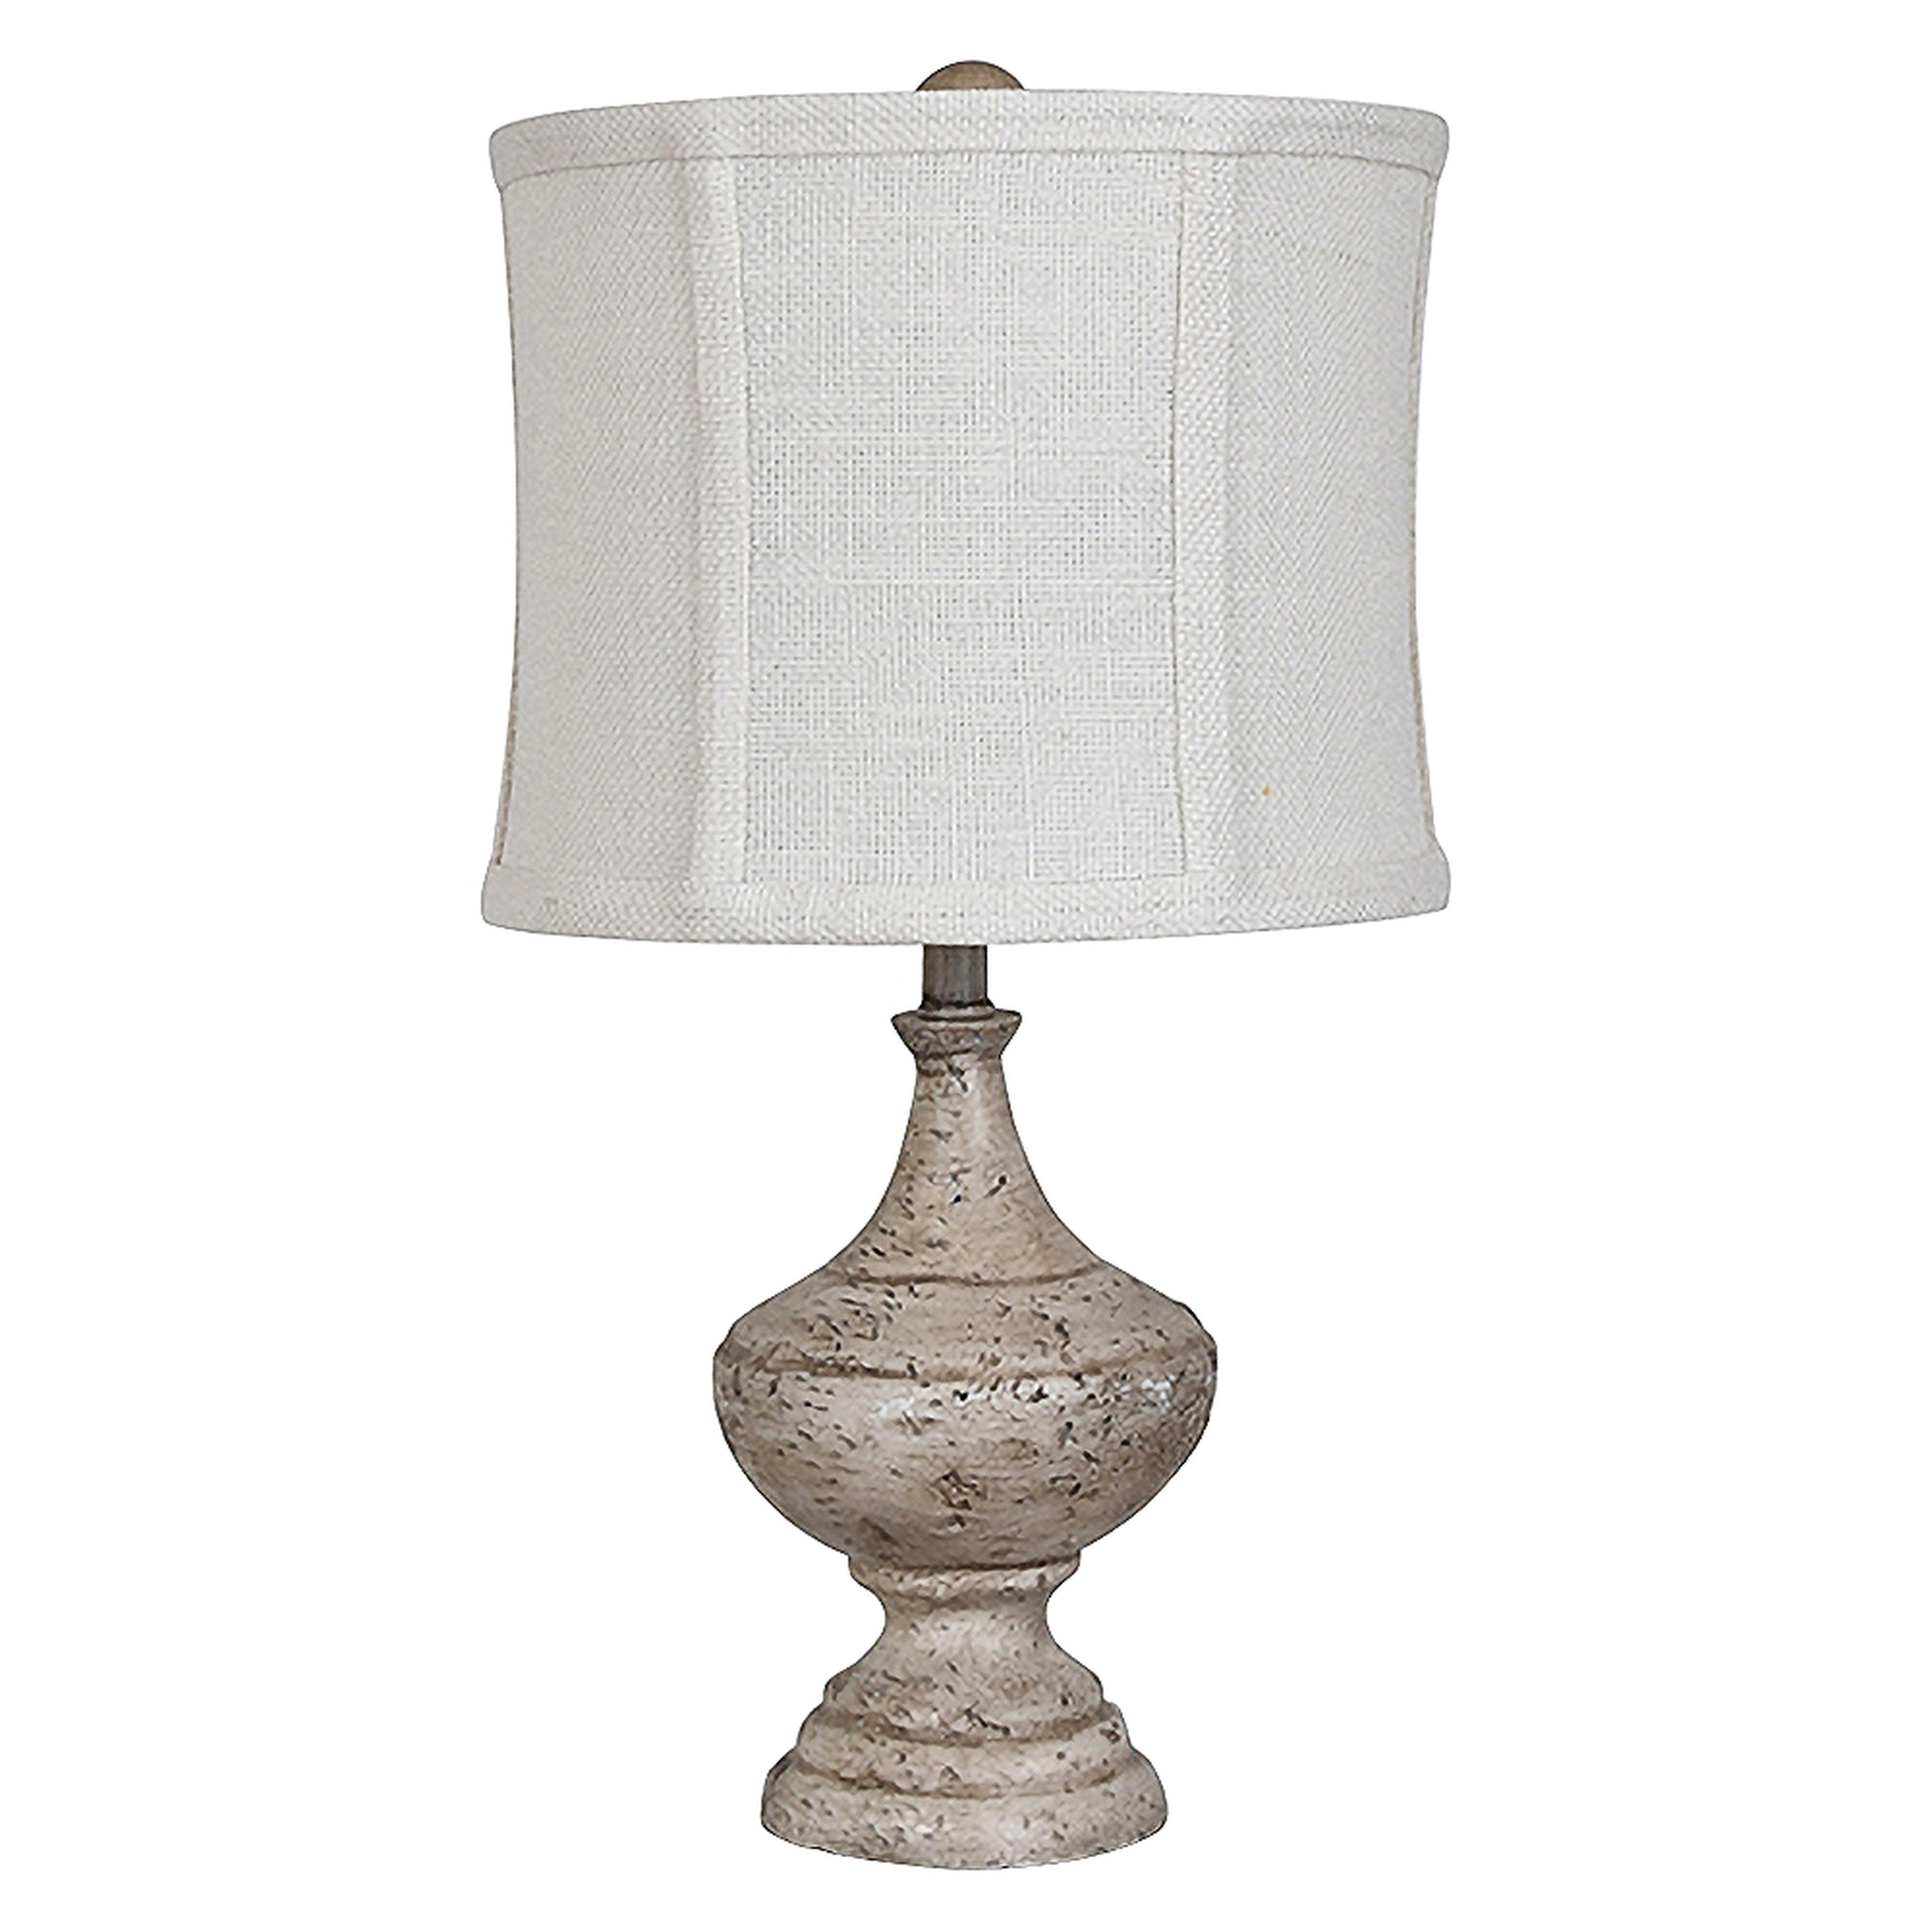 Post Finials 19 1/2" High Antique White Accent Table Lamp - Style # 60R59 - Lamps Plus